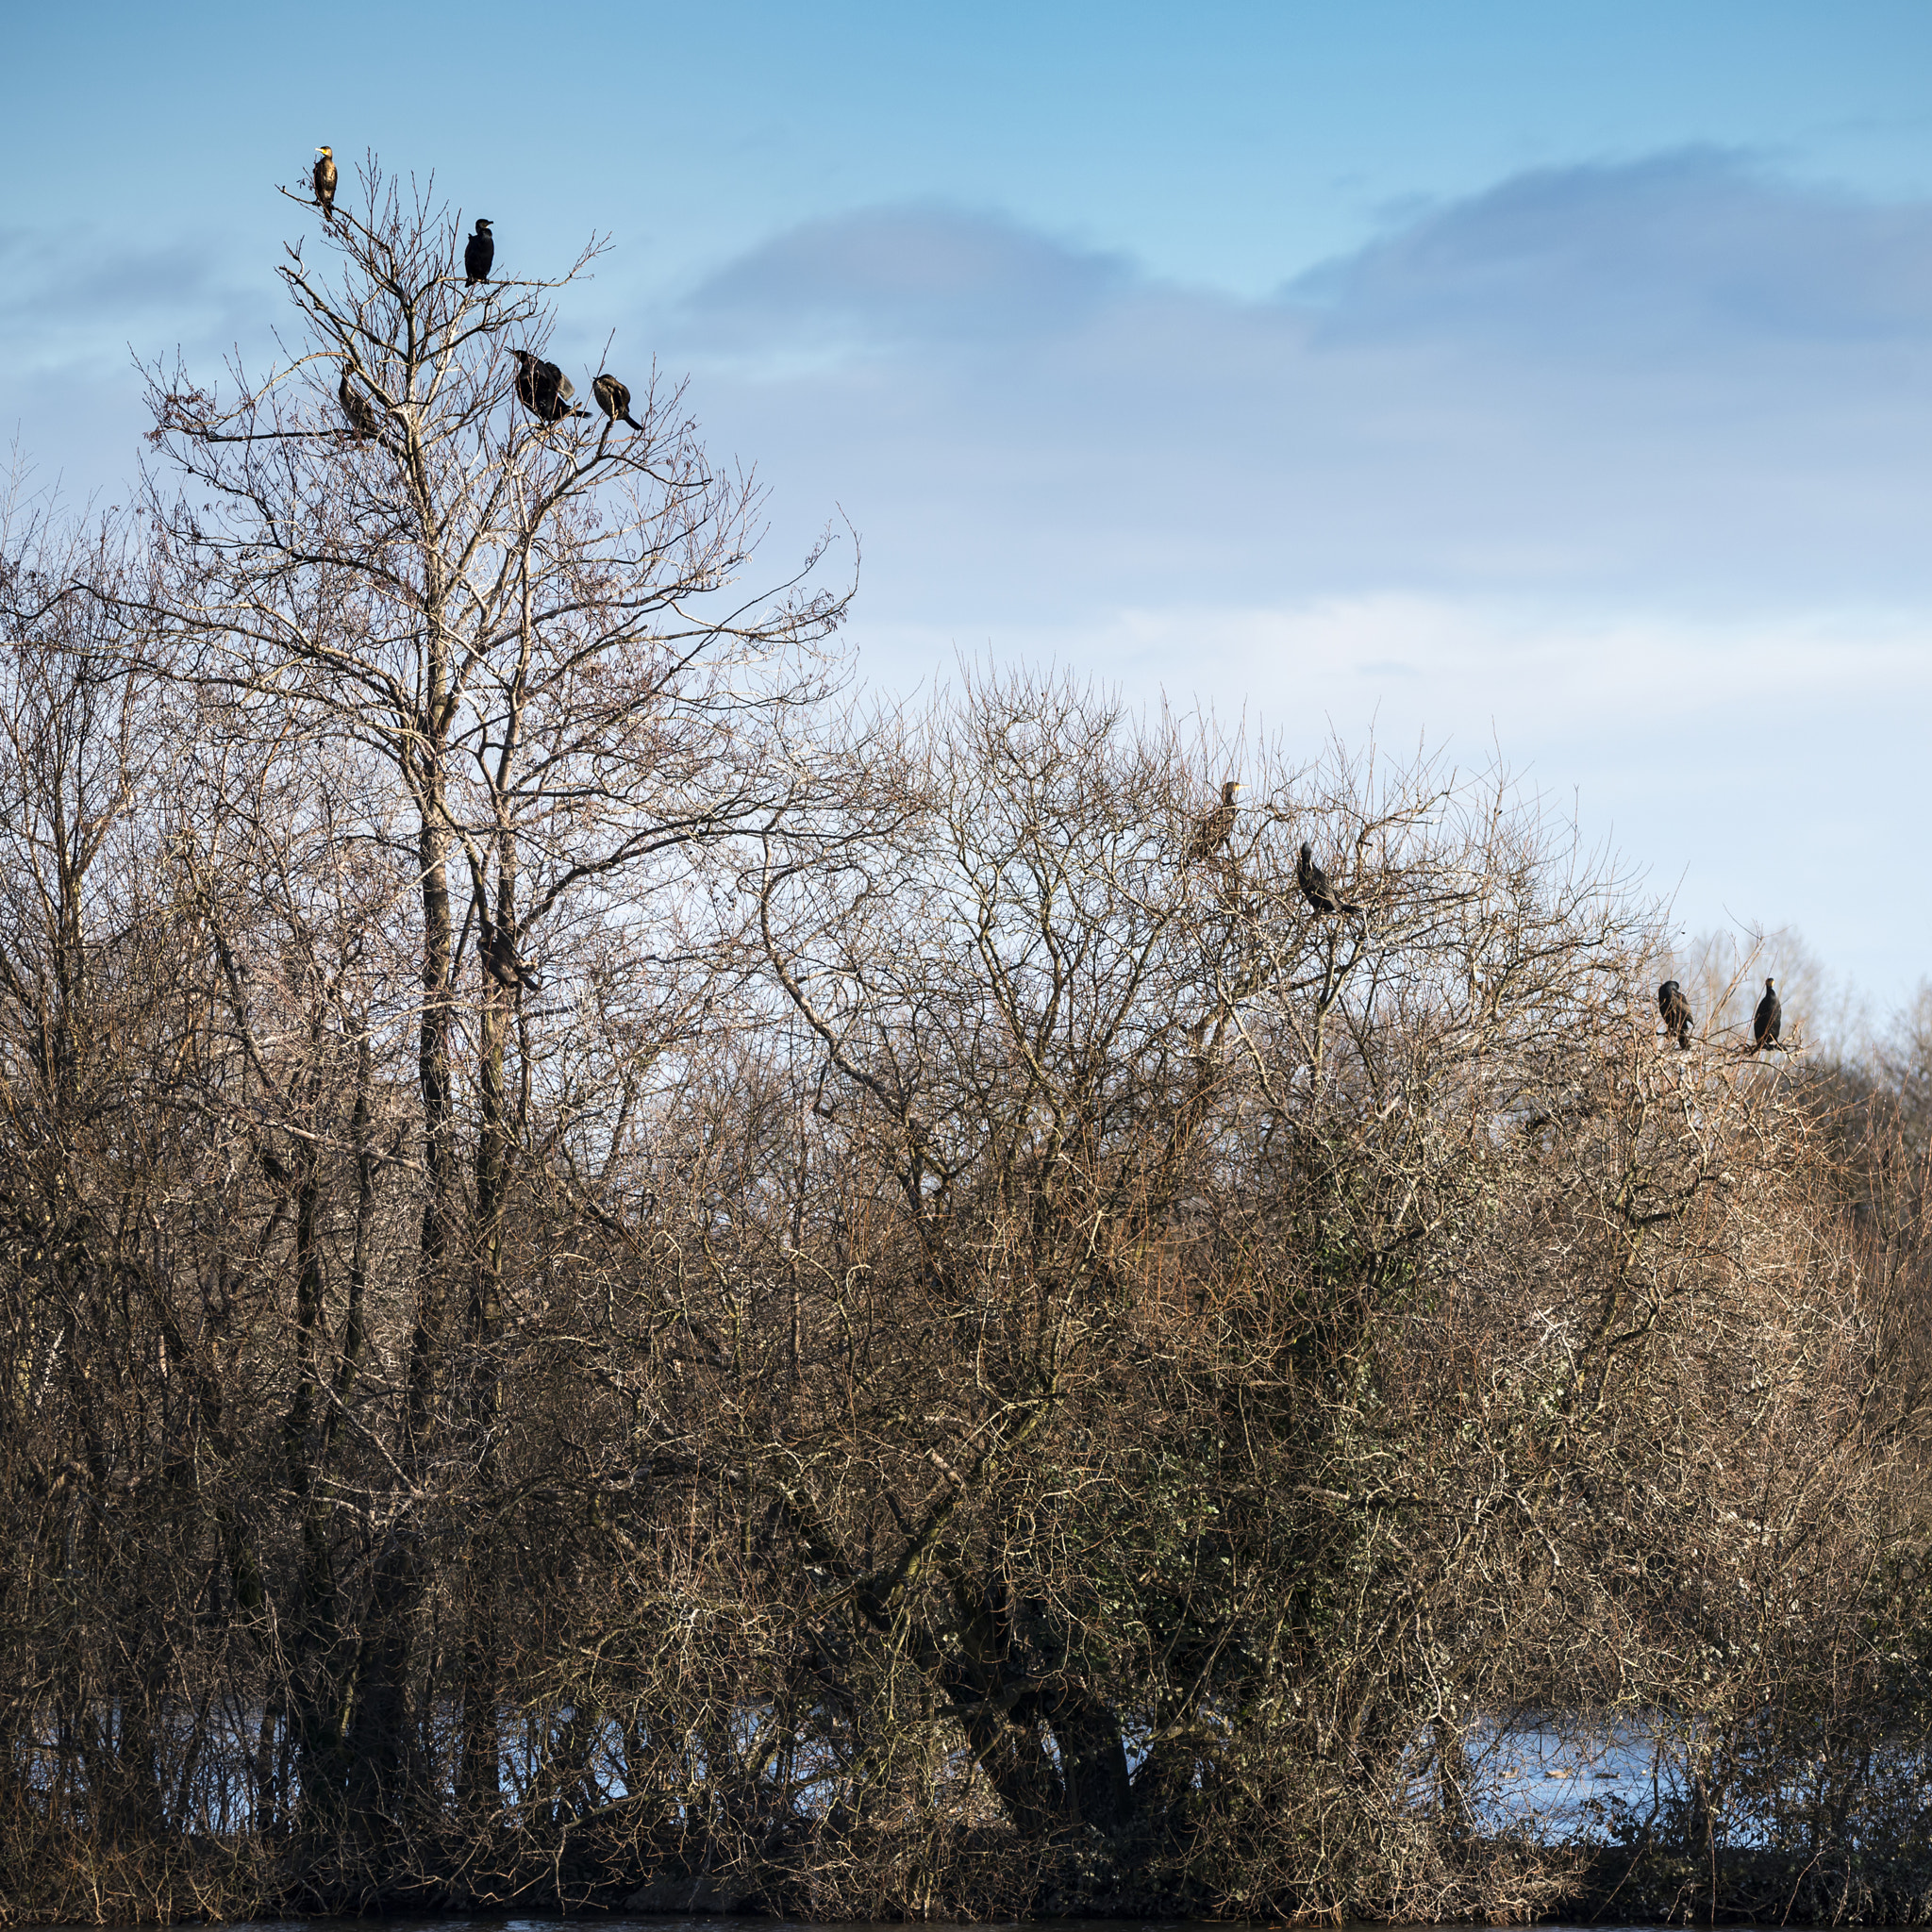 Nikon D800 + Sigma 150-600mm F5-6.3 DG OS HSM | C sample photo. Group of cormorant shag birds roosting in winter tree photography